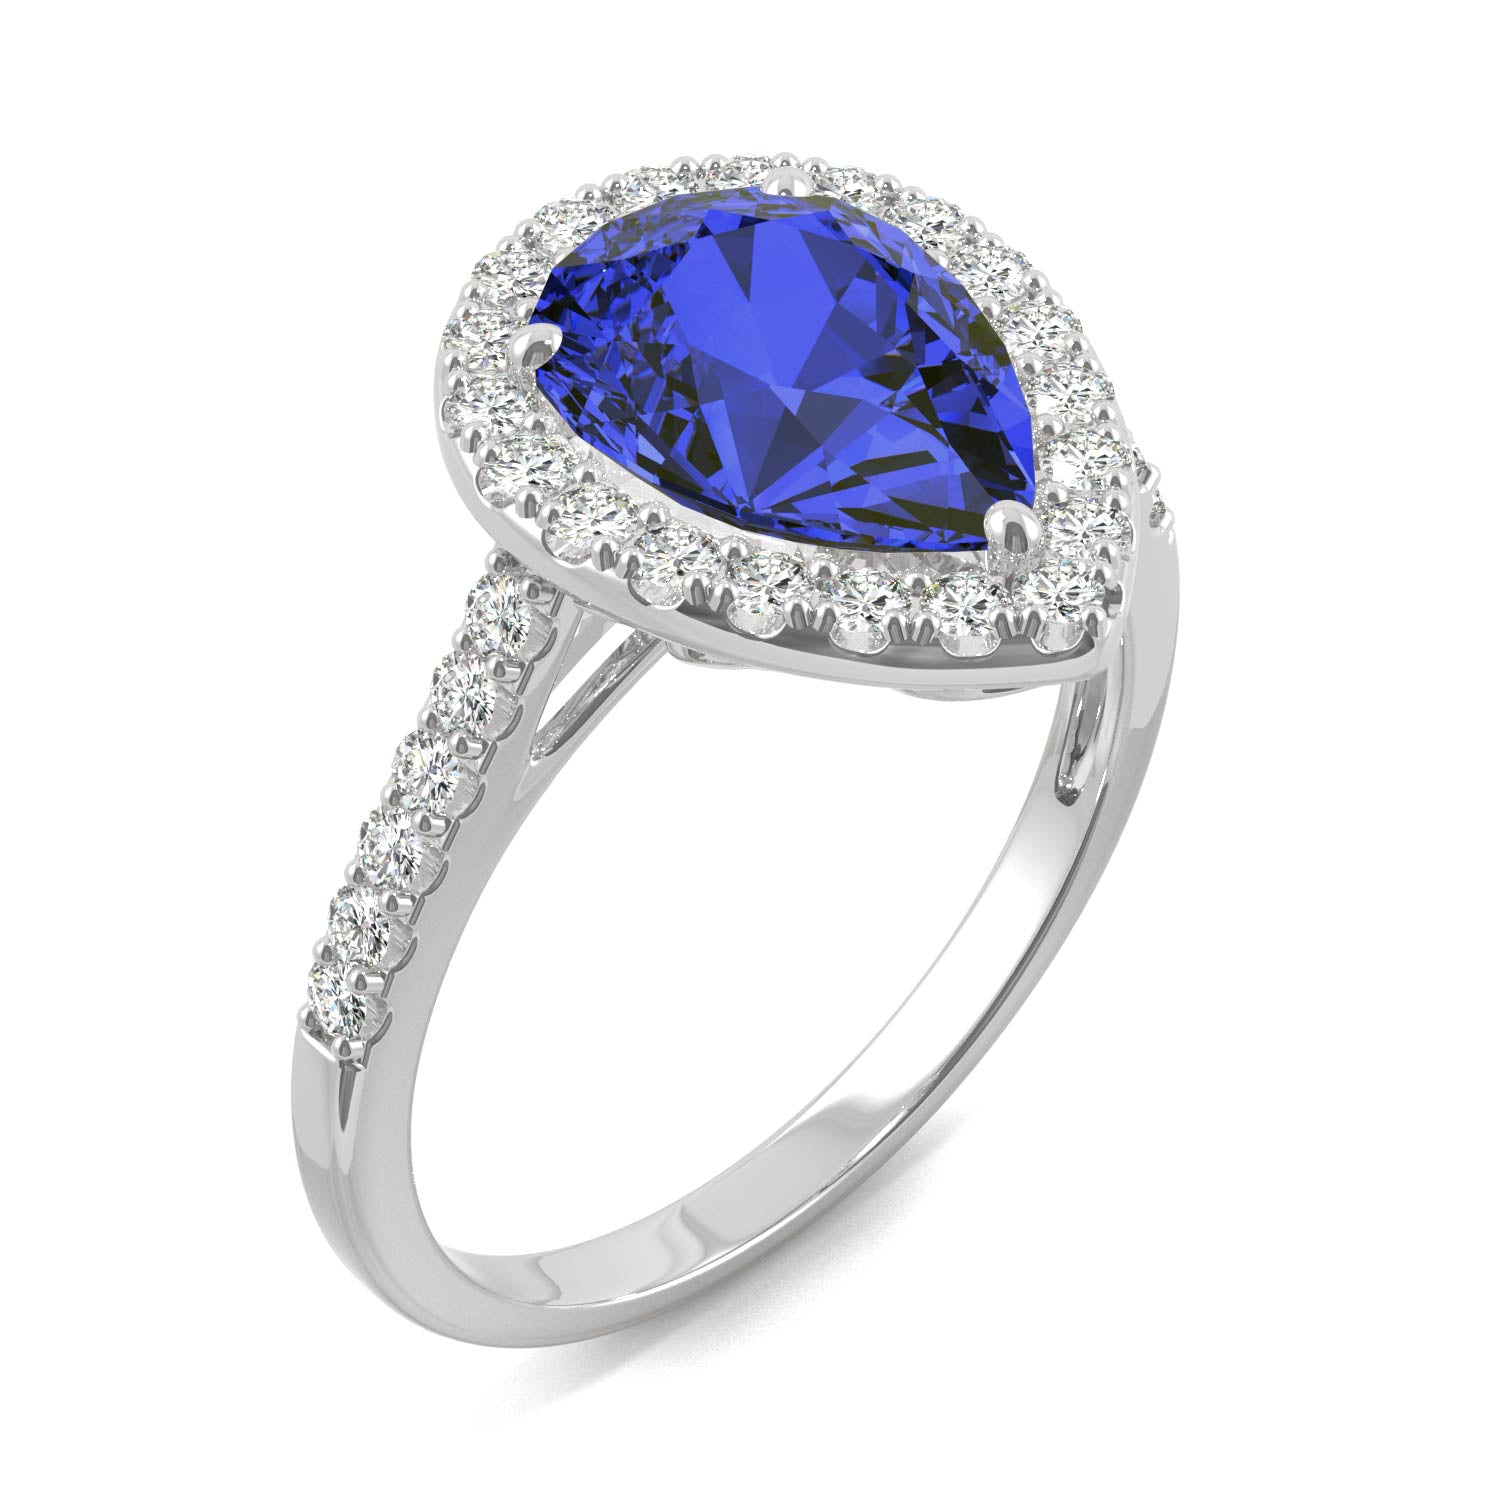 2.98 CTW DEW Pear Sapphire Halo Ring in 14K White Gold